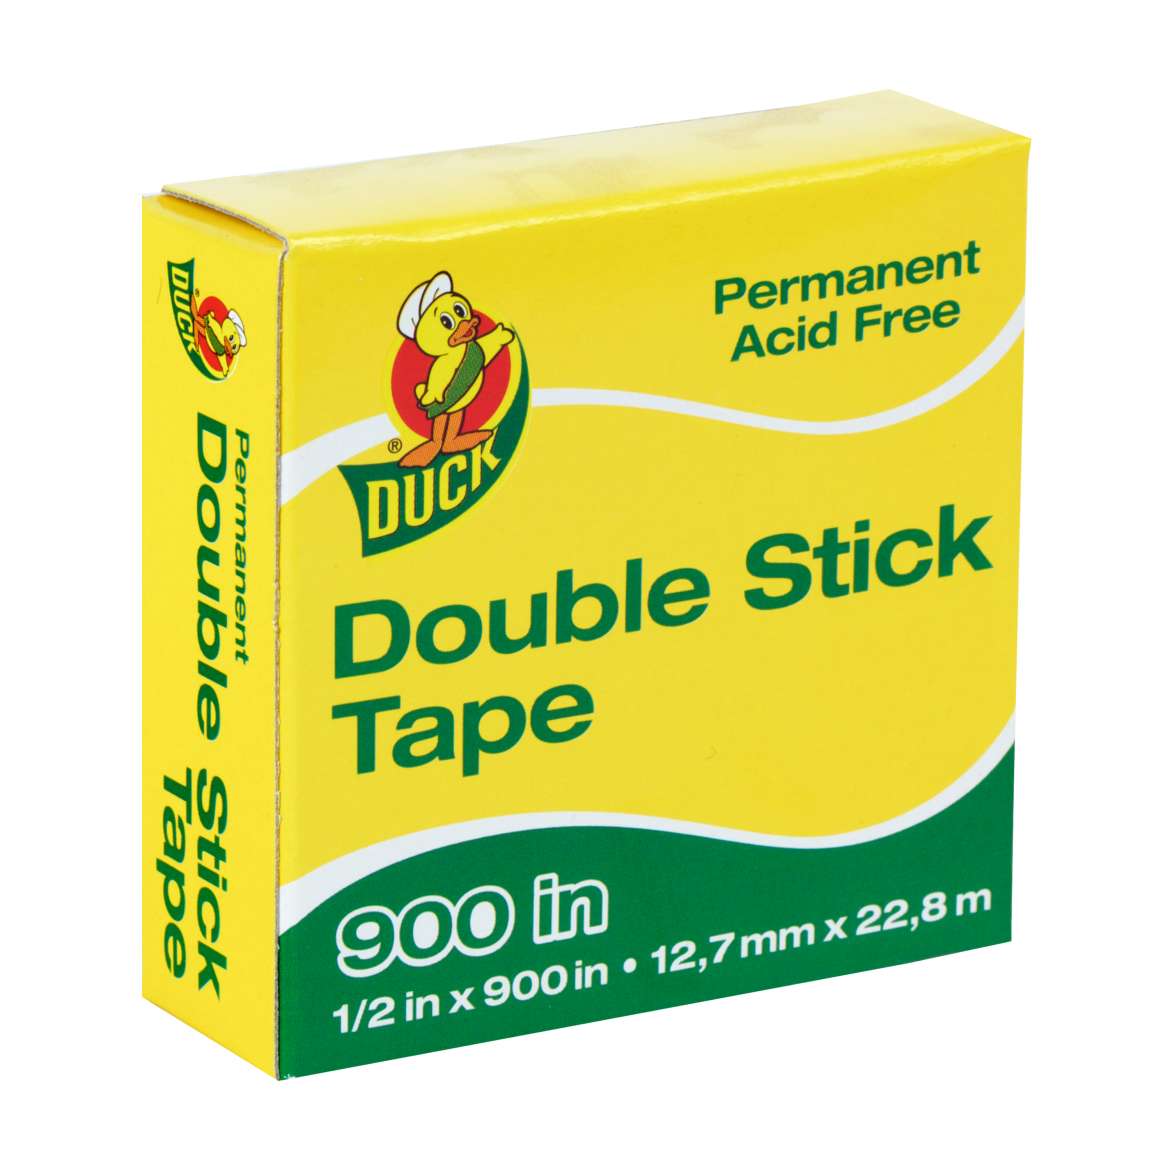 Double Stick Tape Image